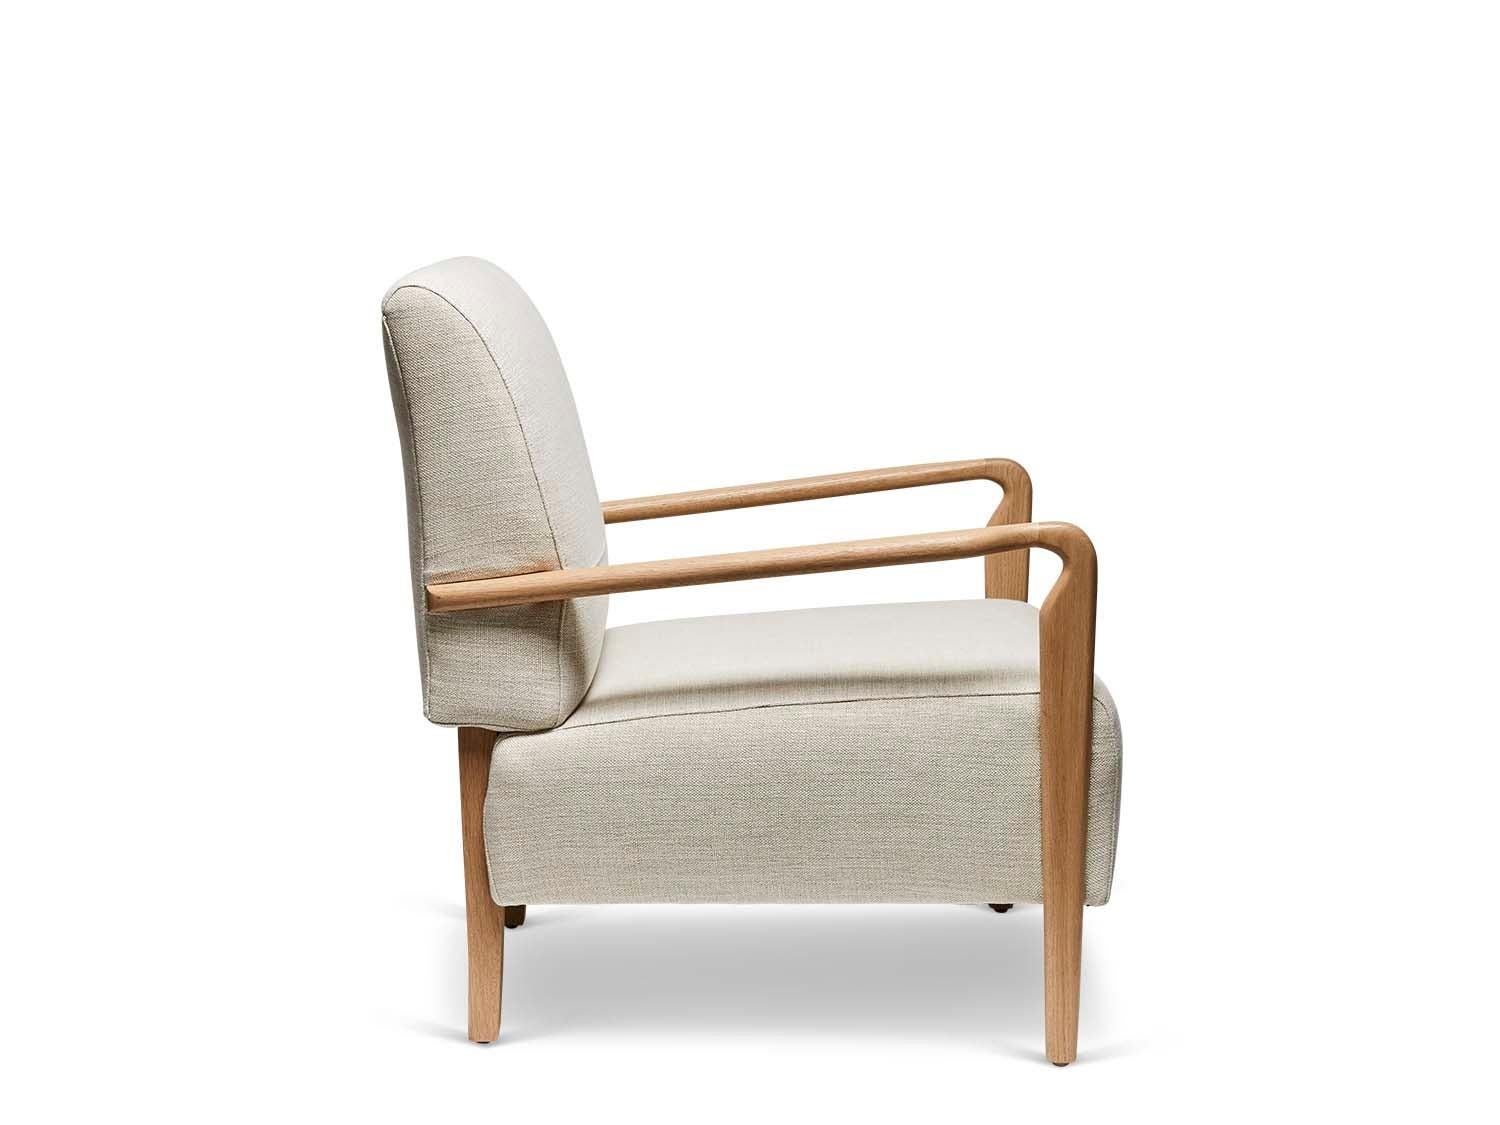 Mid-Century Modern Oak and Linen Niguel Lounge Chair by Lawson-Fenning